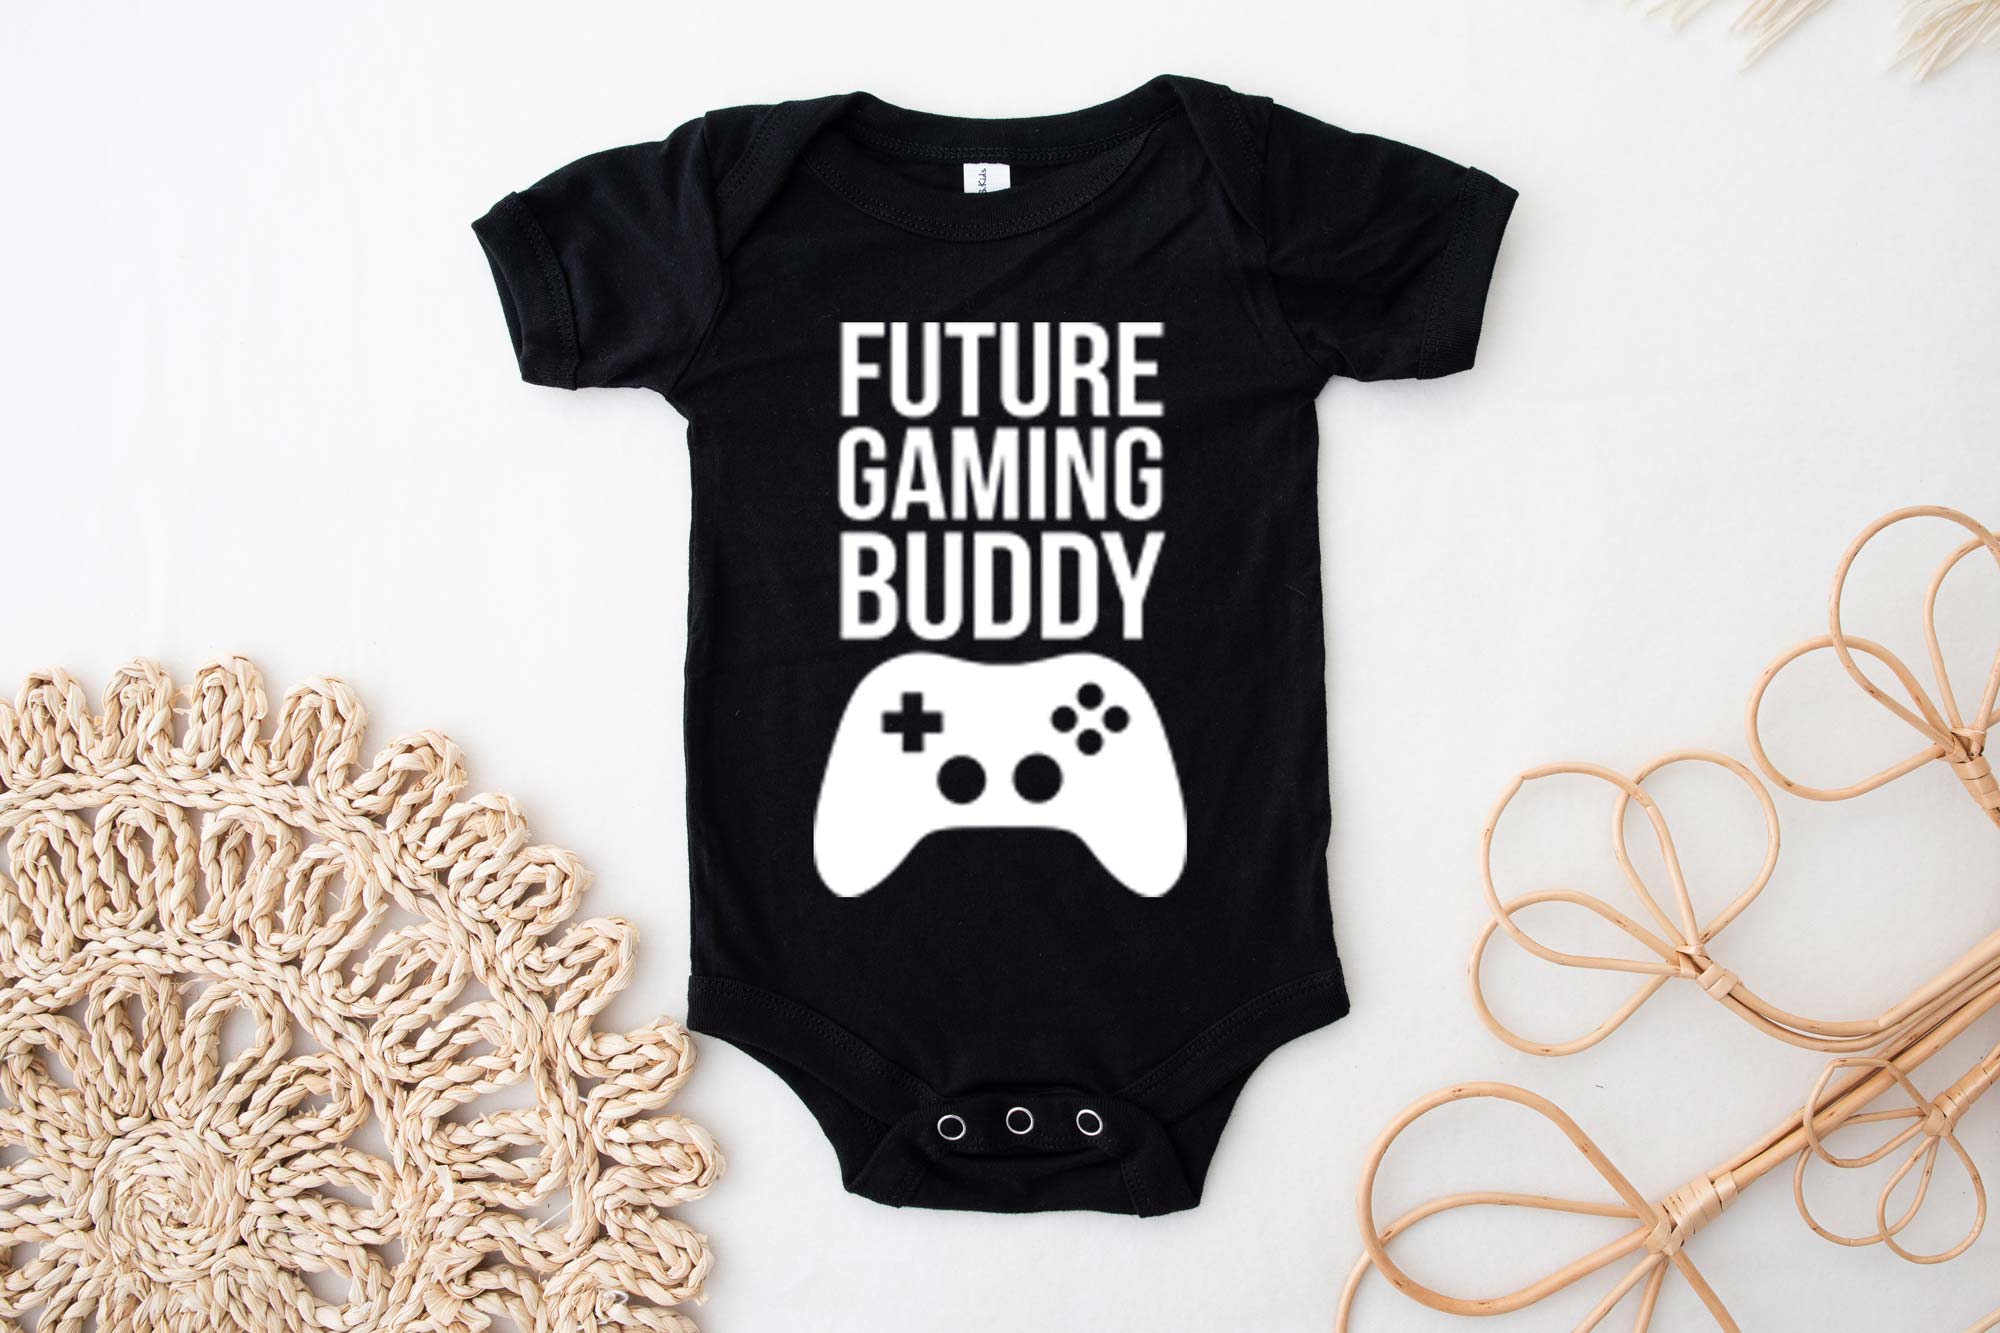 Future Gaming Buddy Baby announcement vest